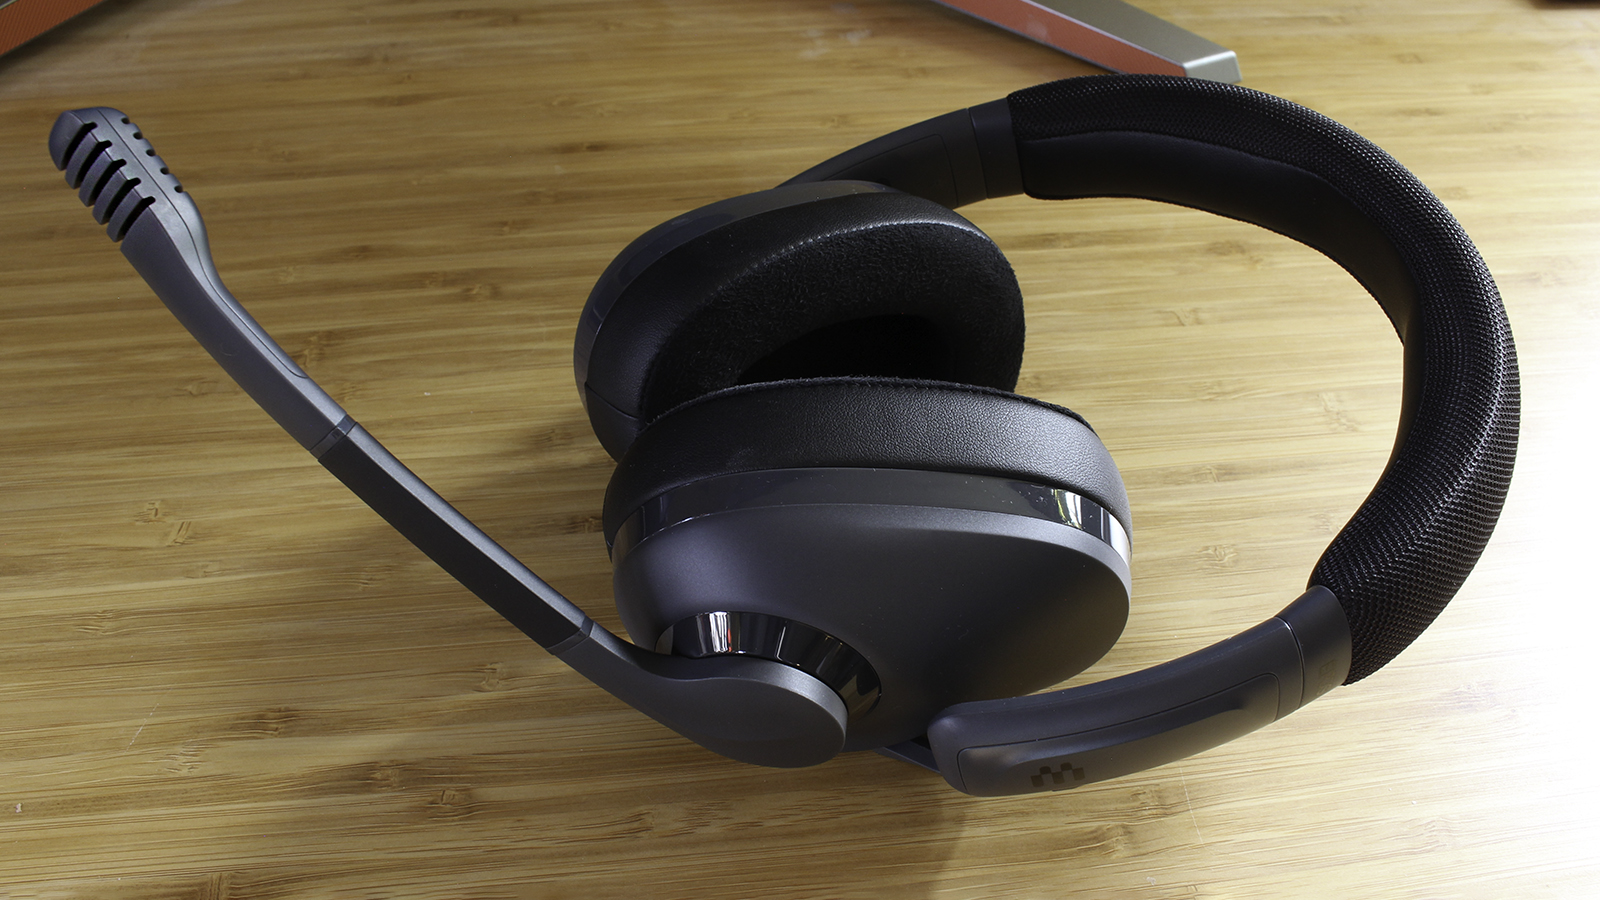 EPOS H6 Pro Closed Gaming Headset Review